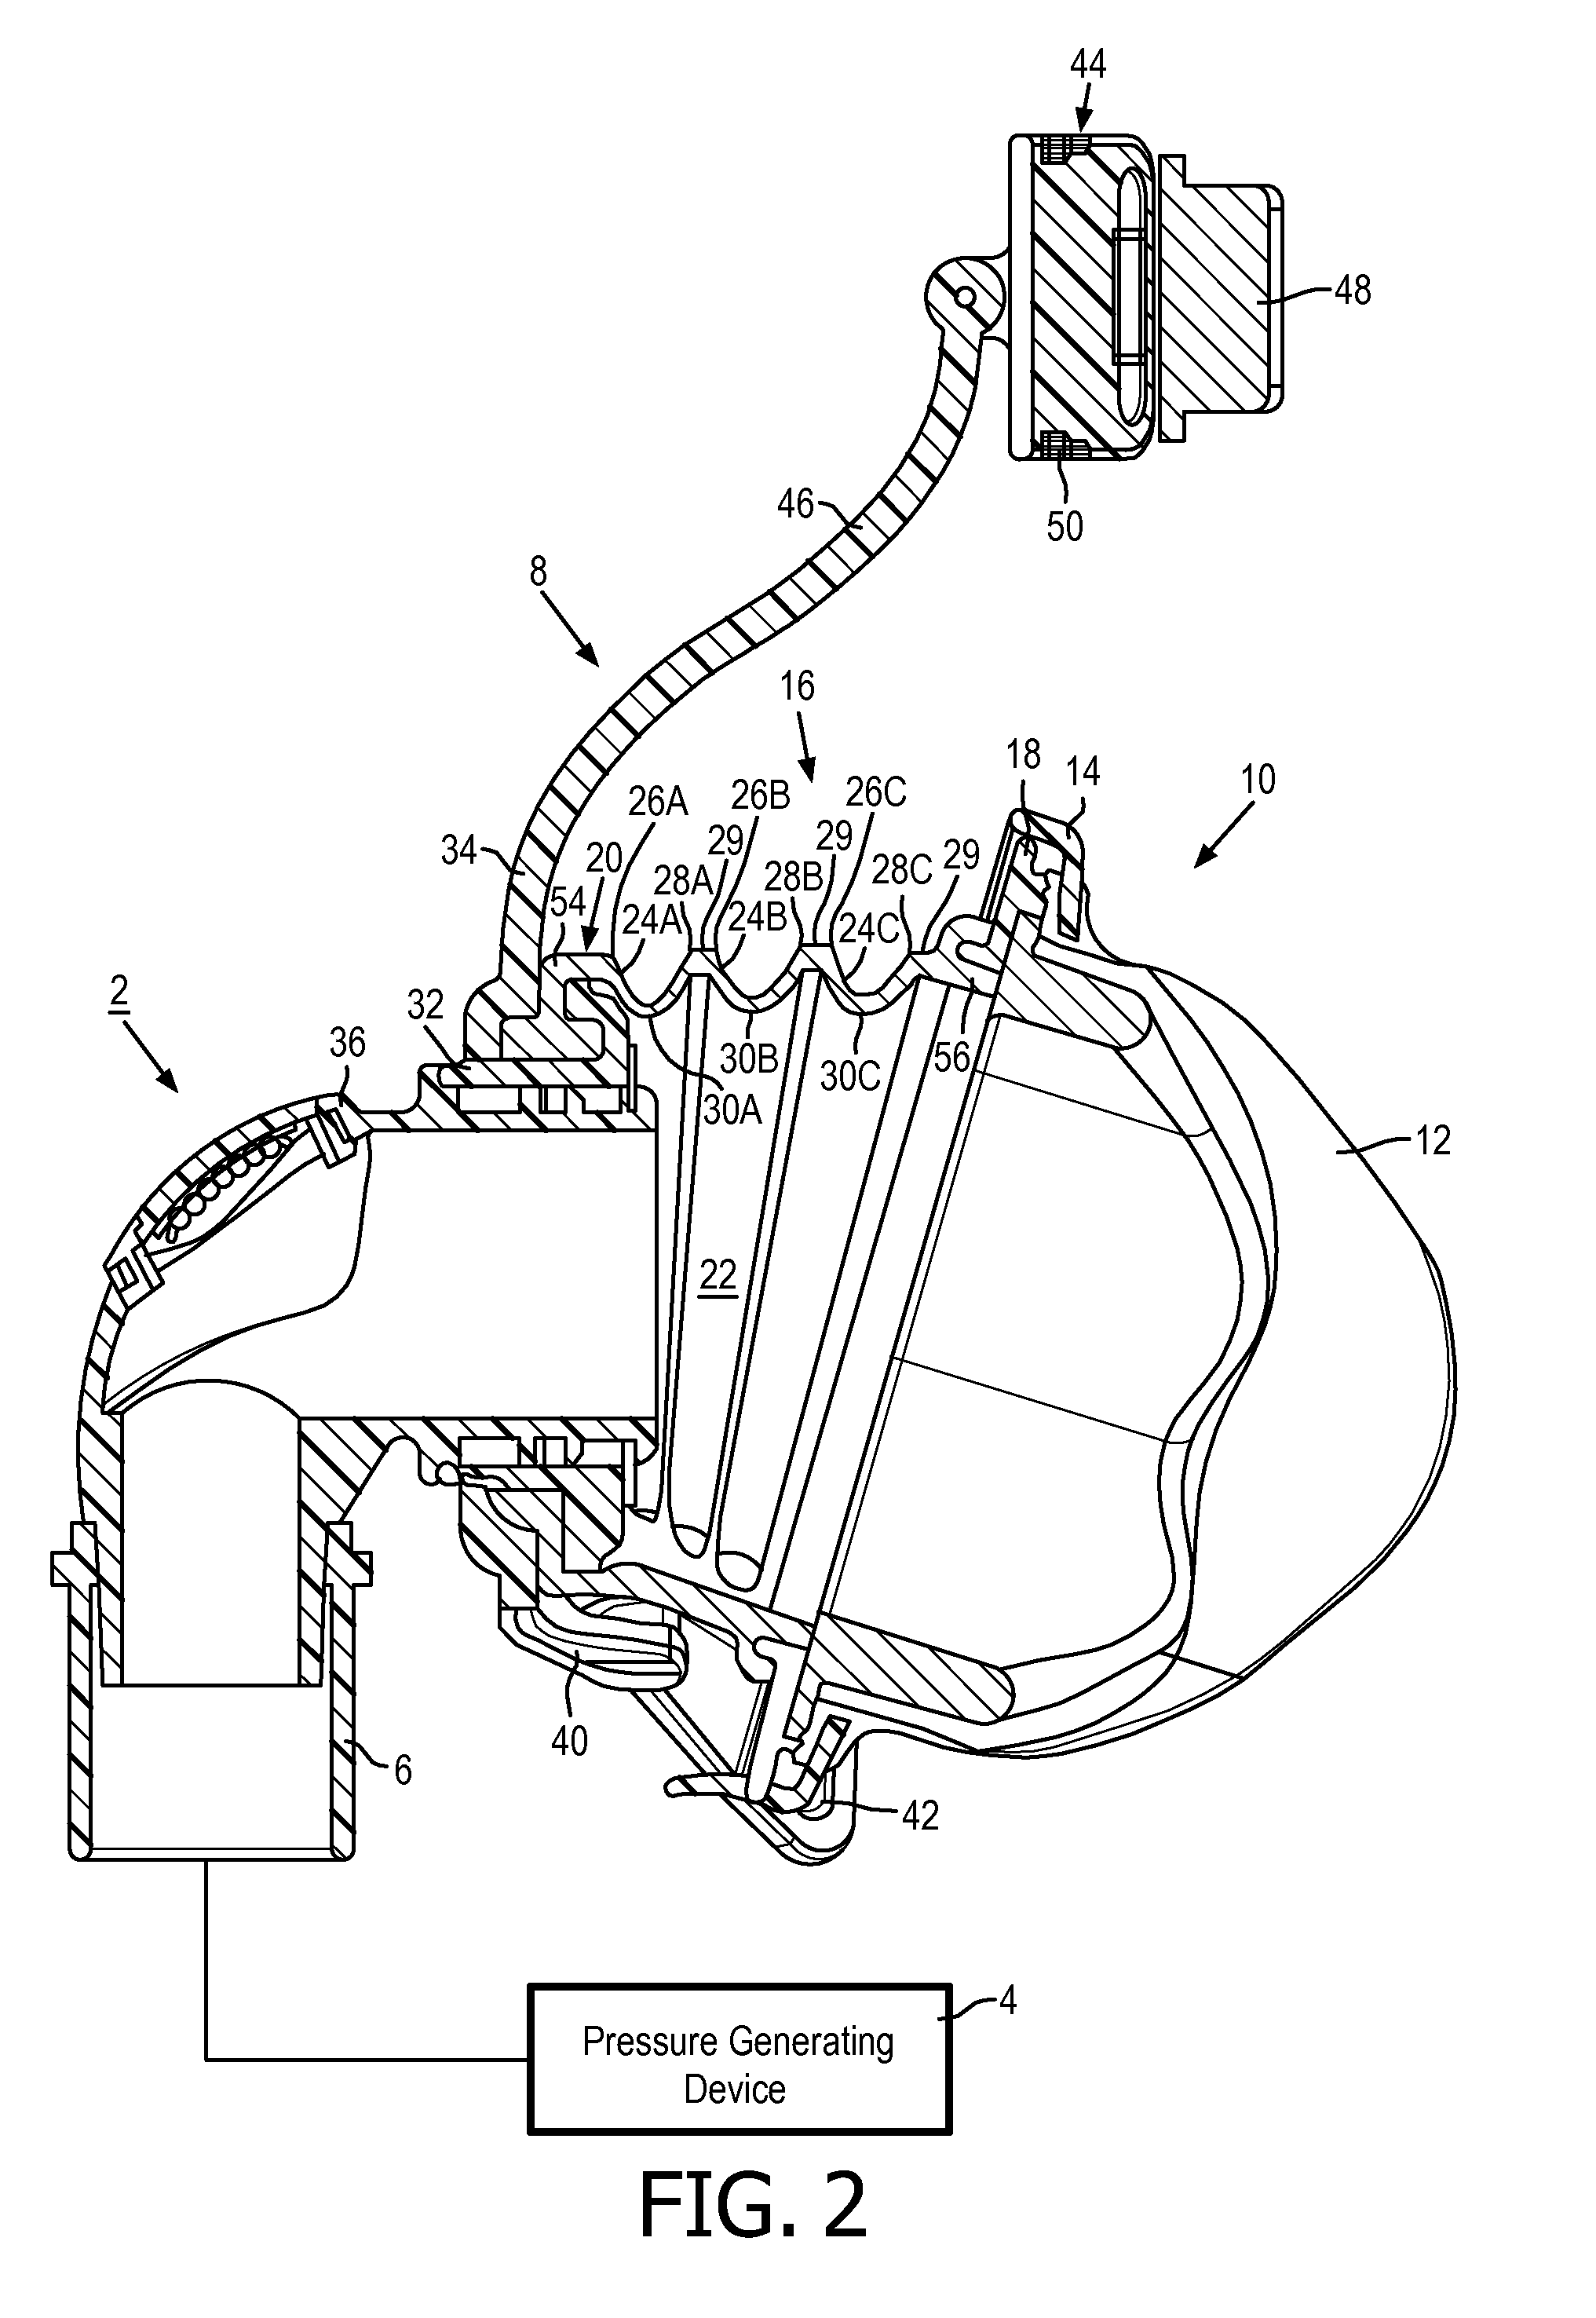 Patient interface device including a dynamic self adjustment mechanism